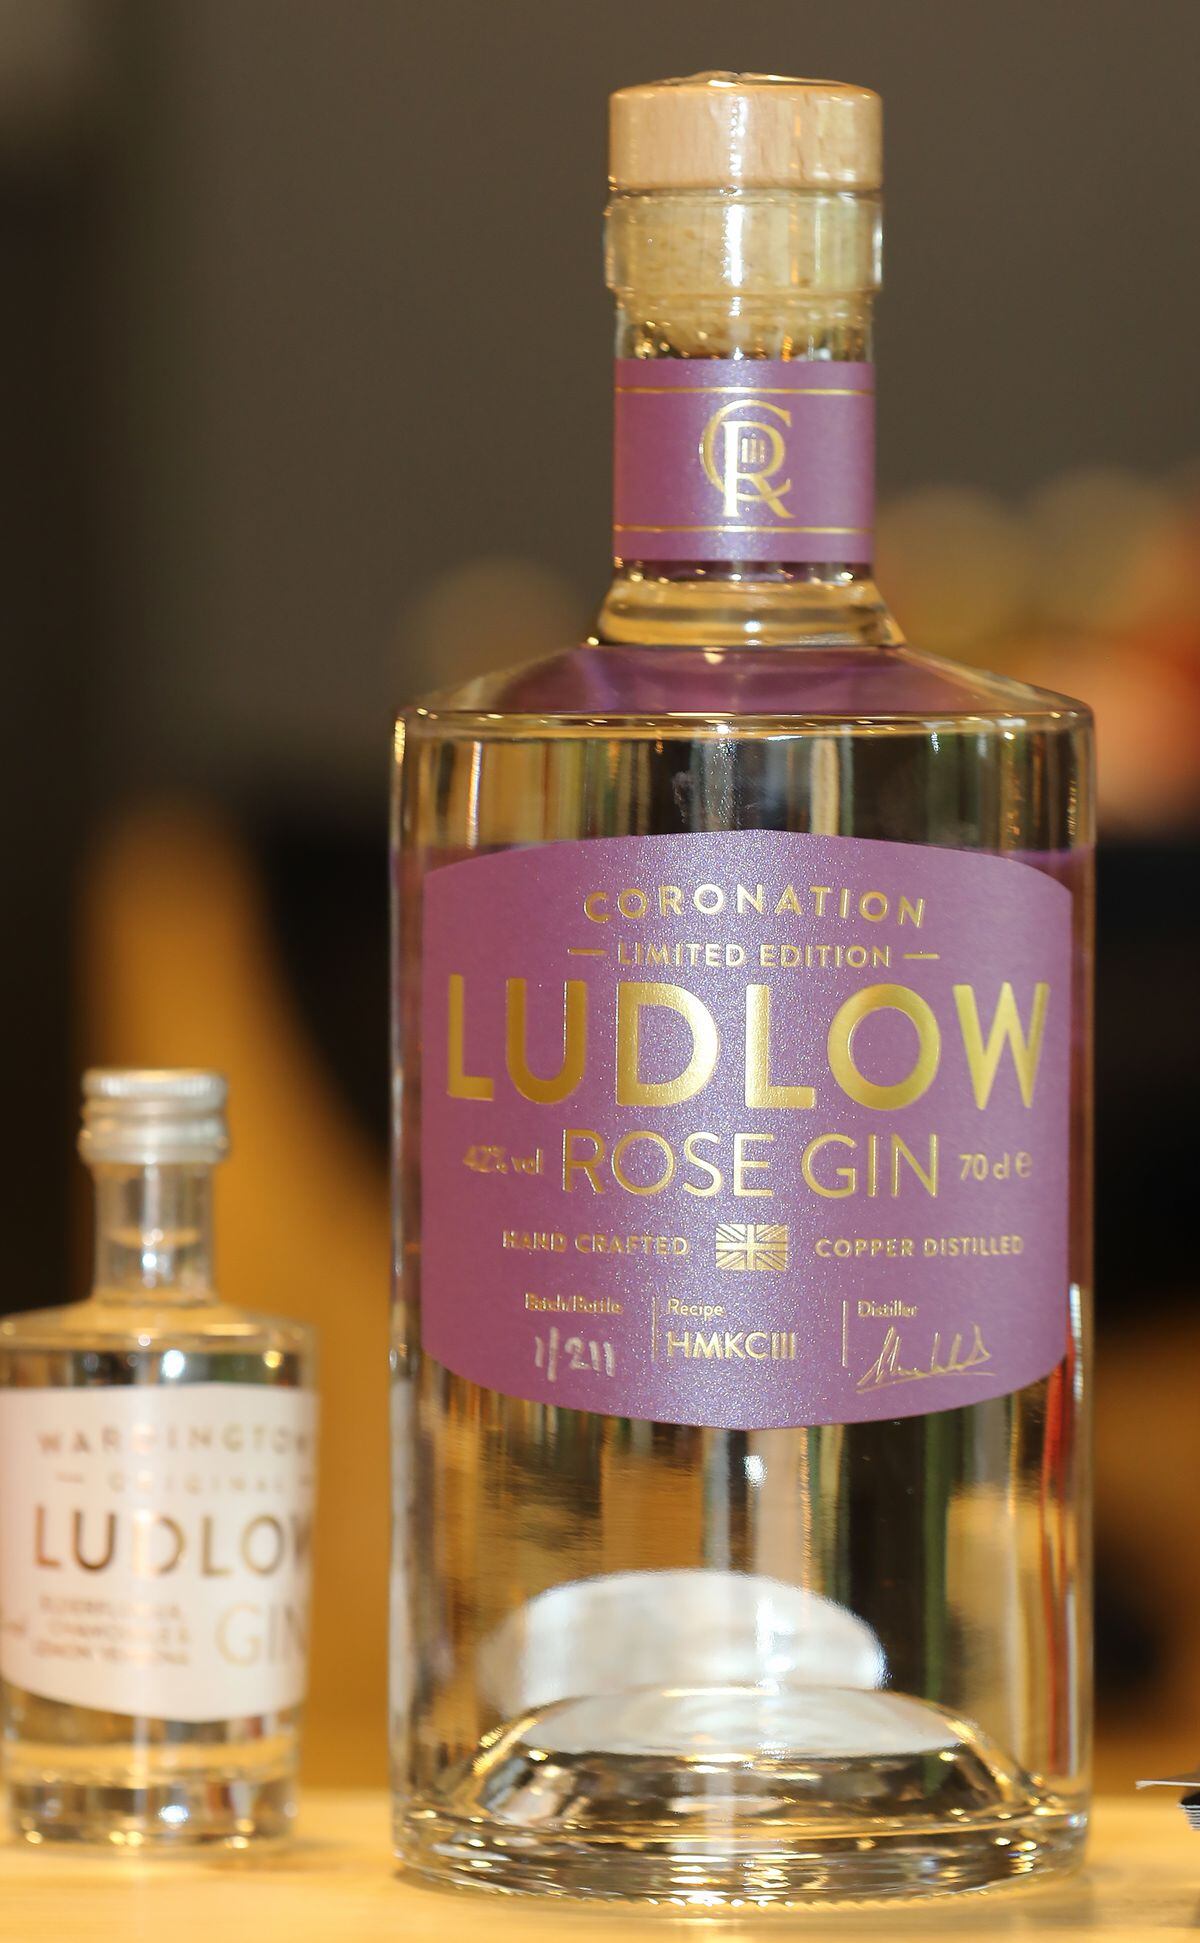 Ludlow Distillery's Coronation Limited Edition Rose Gin